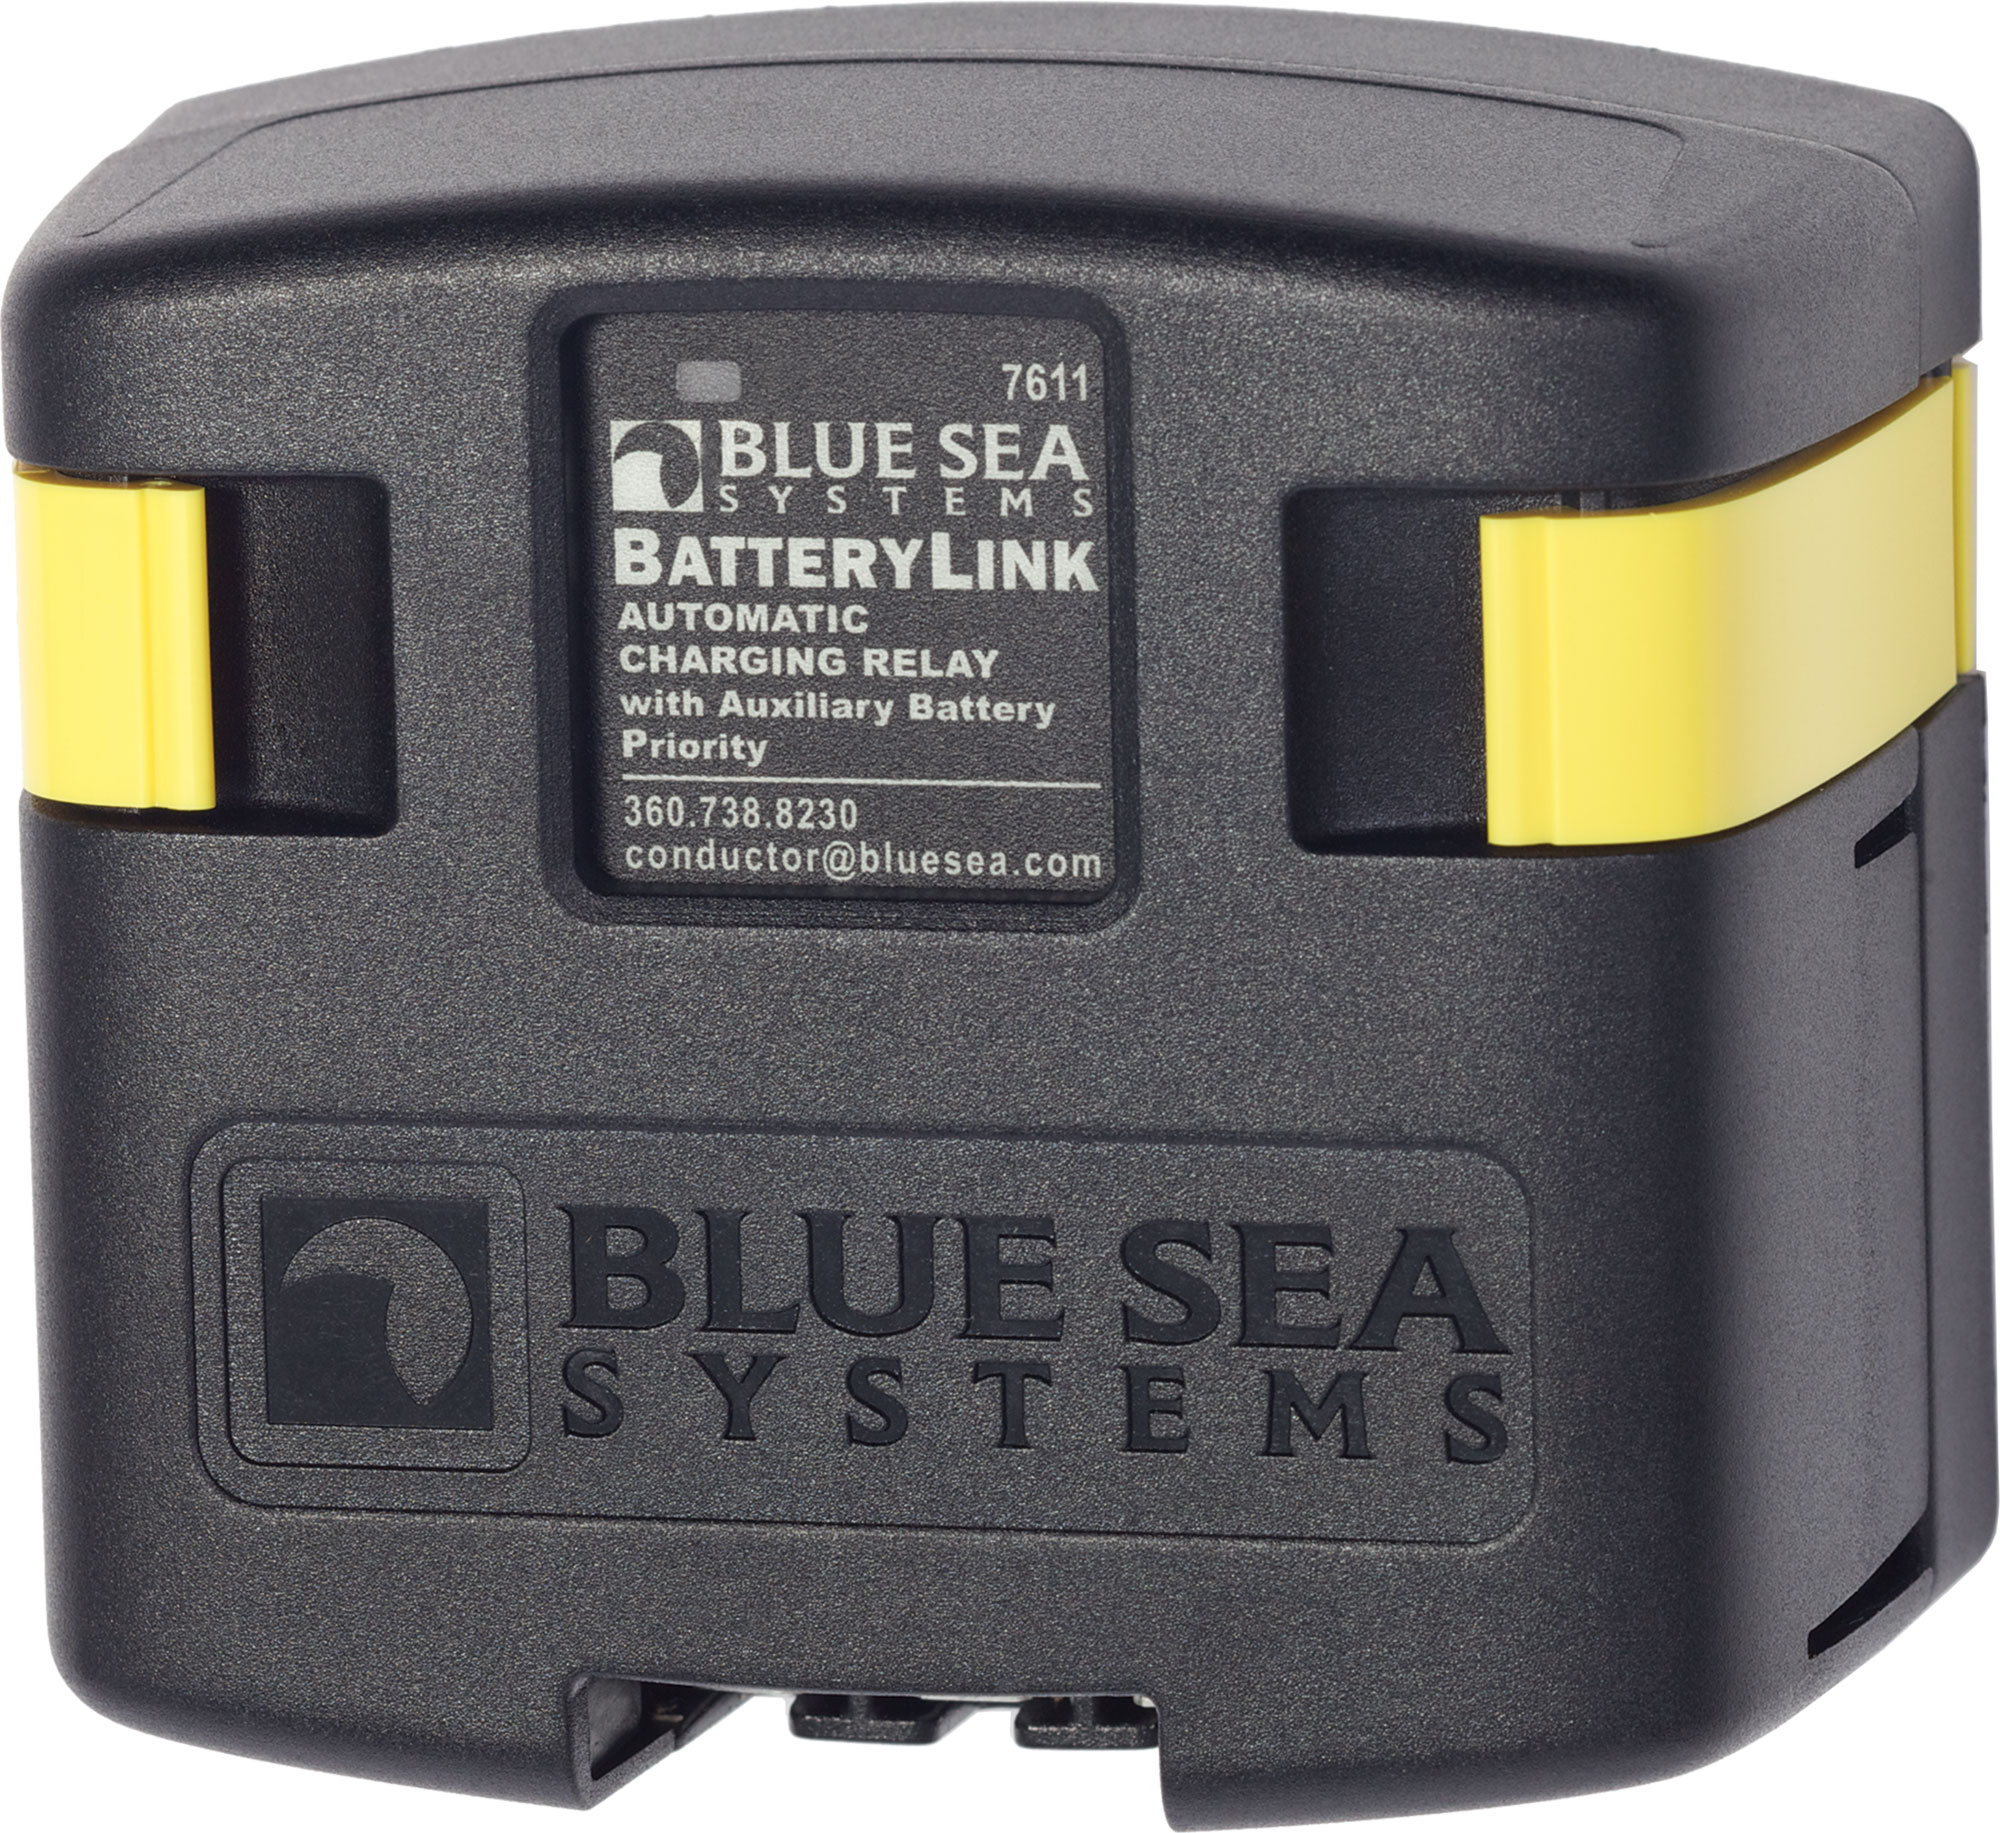 Part# 7611  Manufacturer Blue Sea Systems  Part Type Battery Solenoid